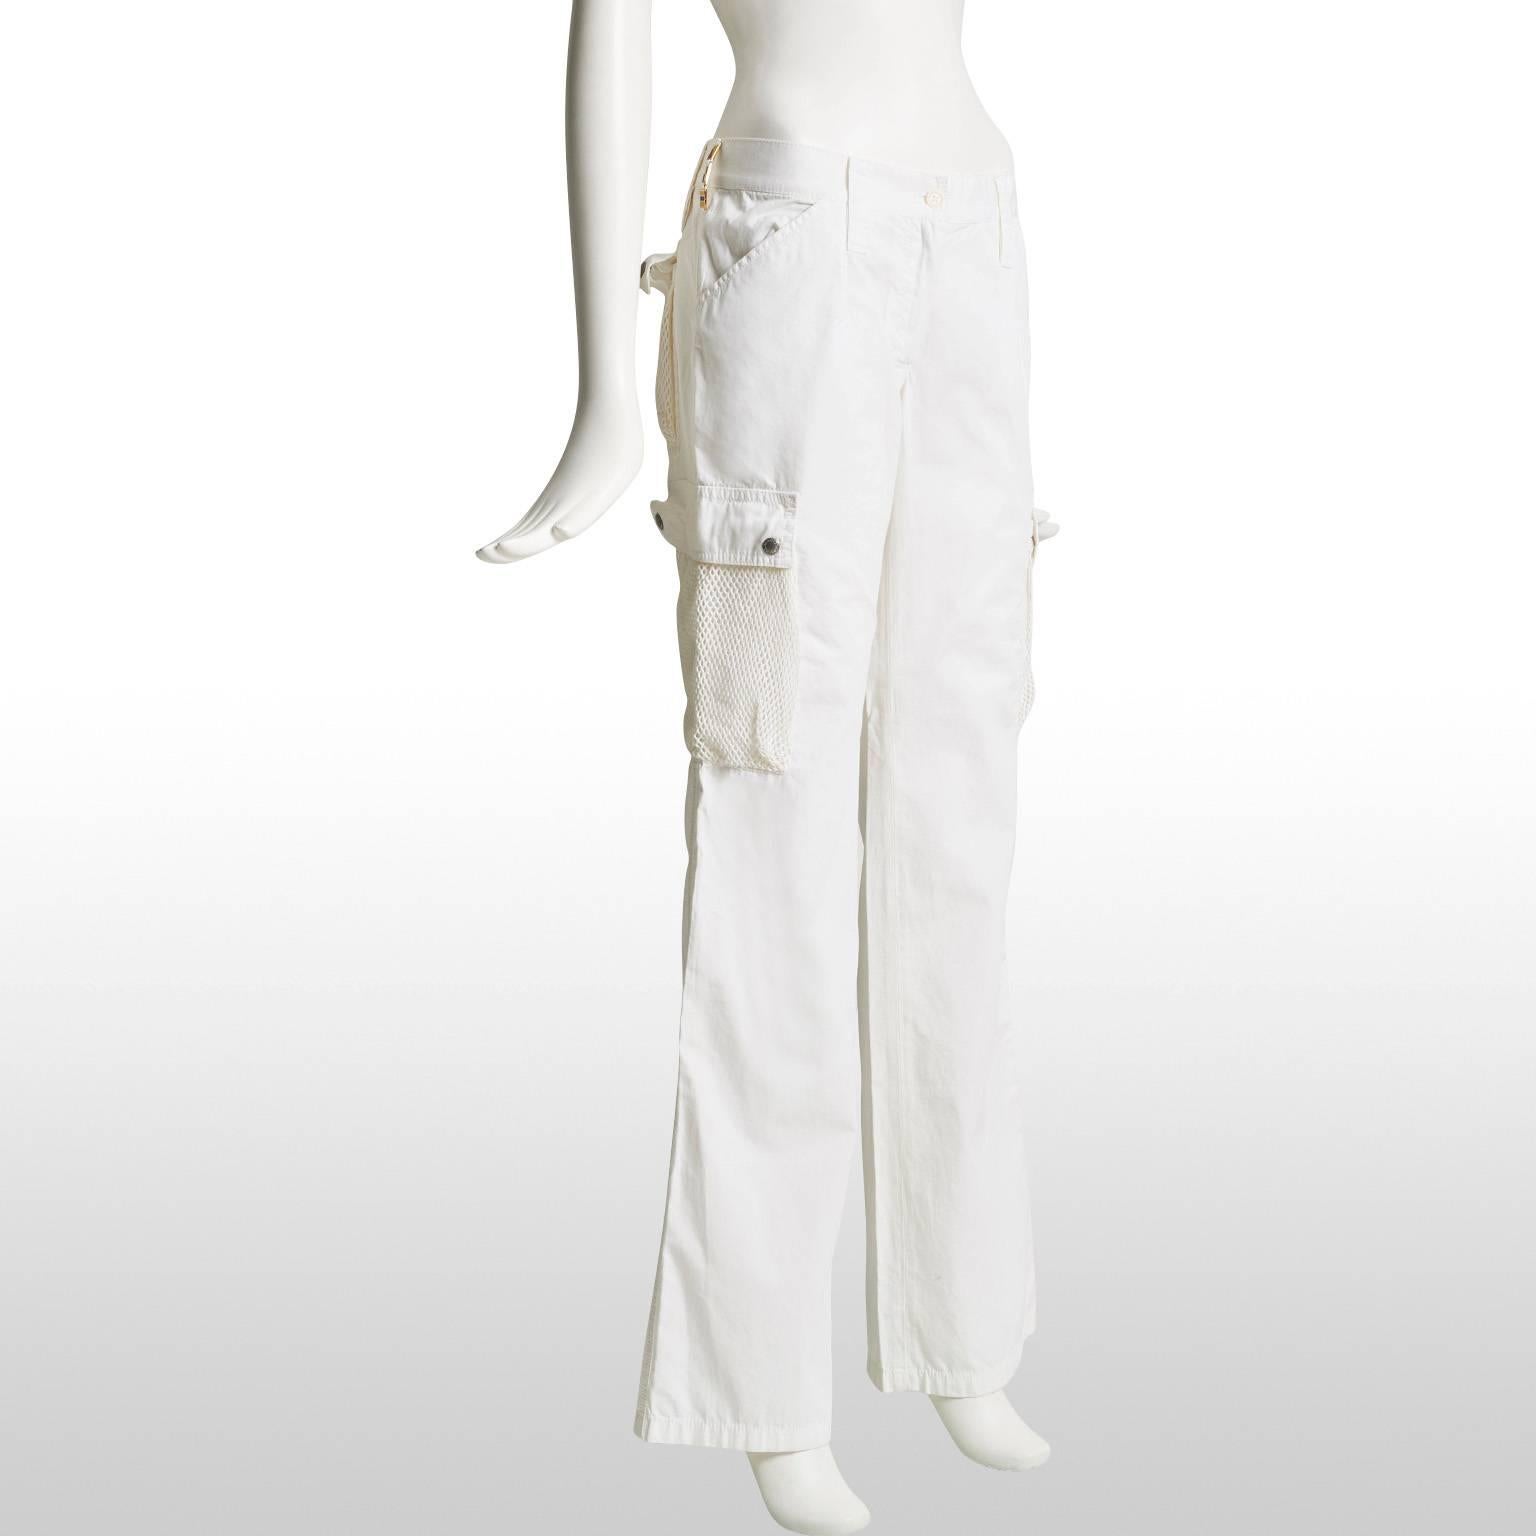 Funky Dolce and Gabbana egg white, straight leg cargo style trousers with mesh flap pockets at the side of the leg and at the back. The trousers sit comfortably on the hips and can also be worn with a belt, two of the belt loops features a gold